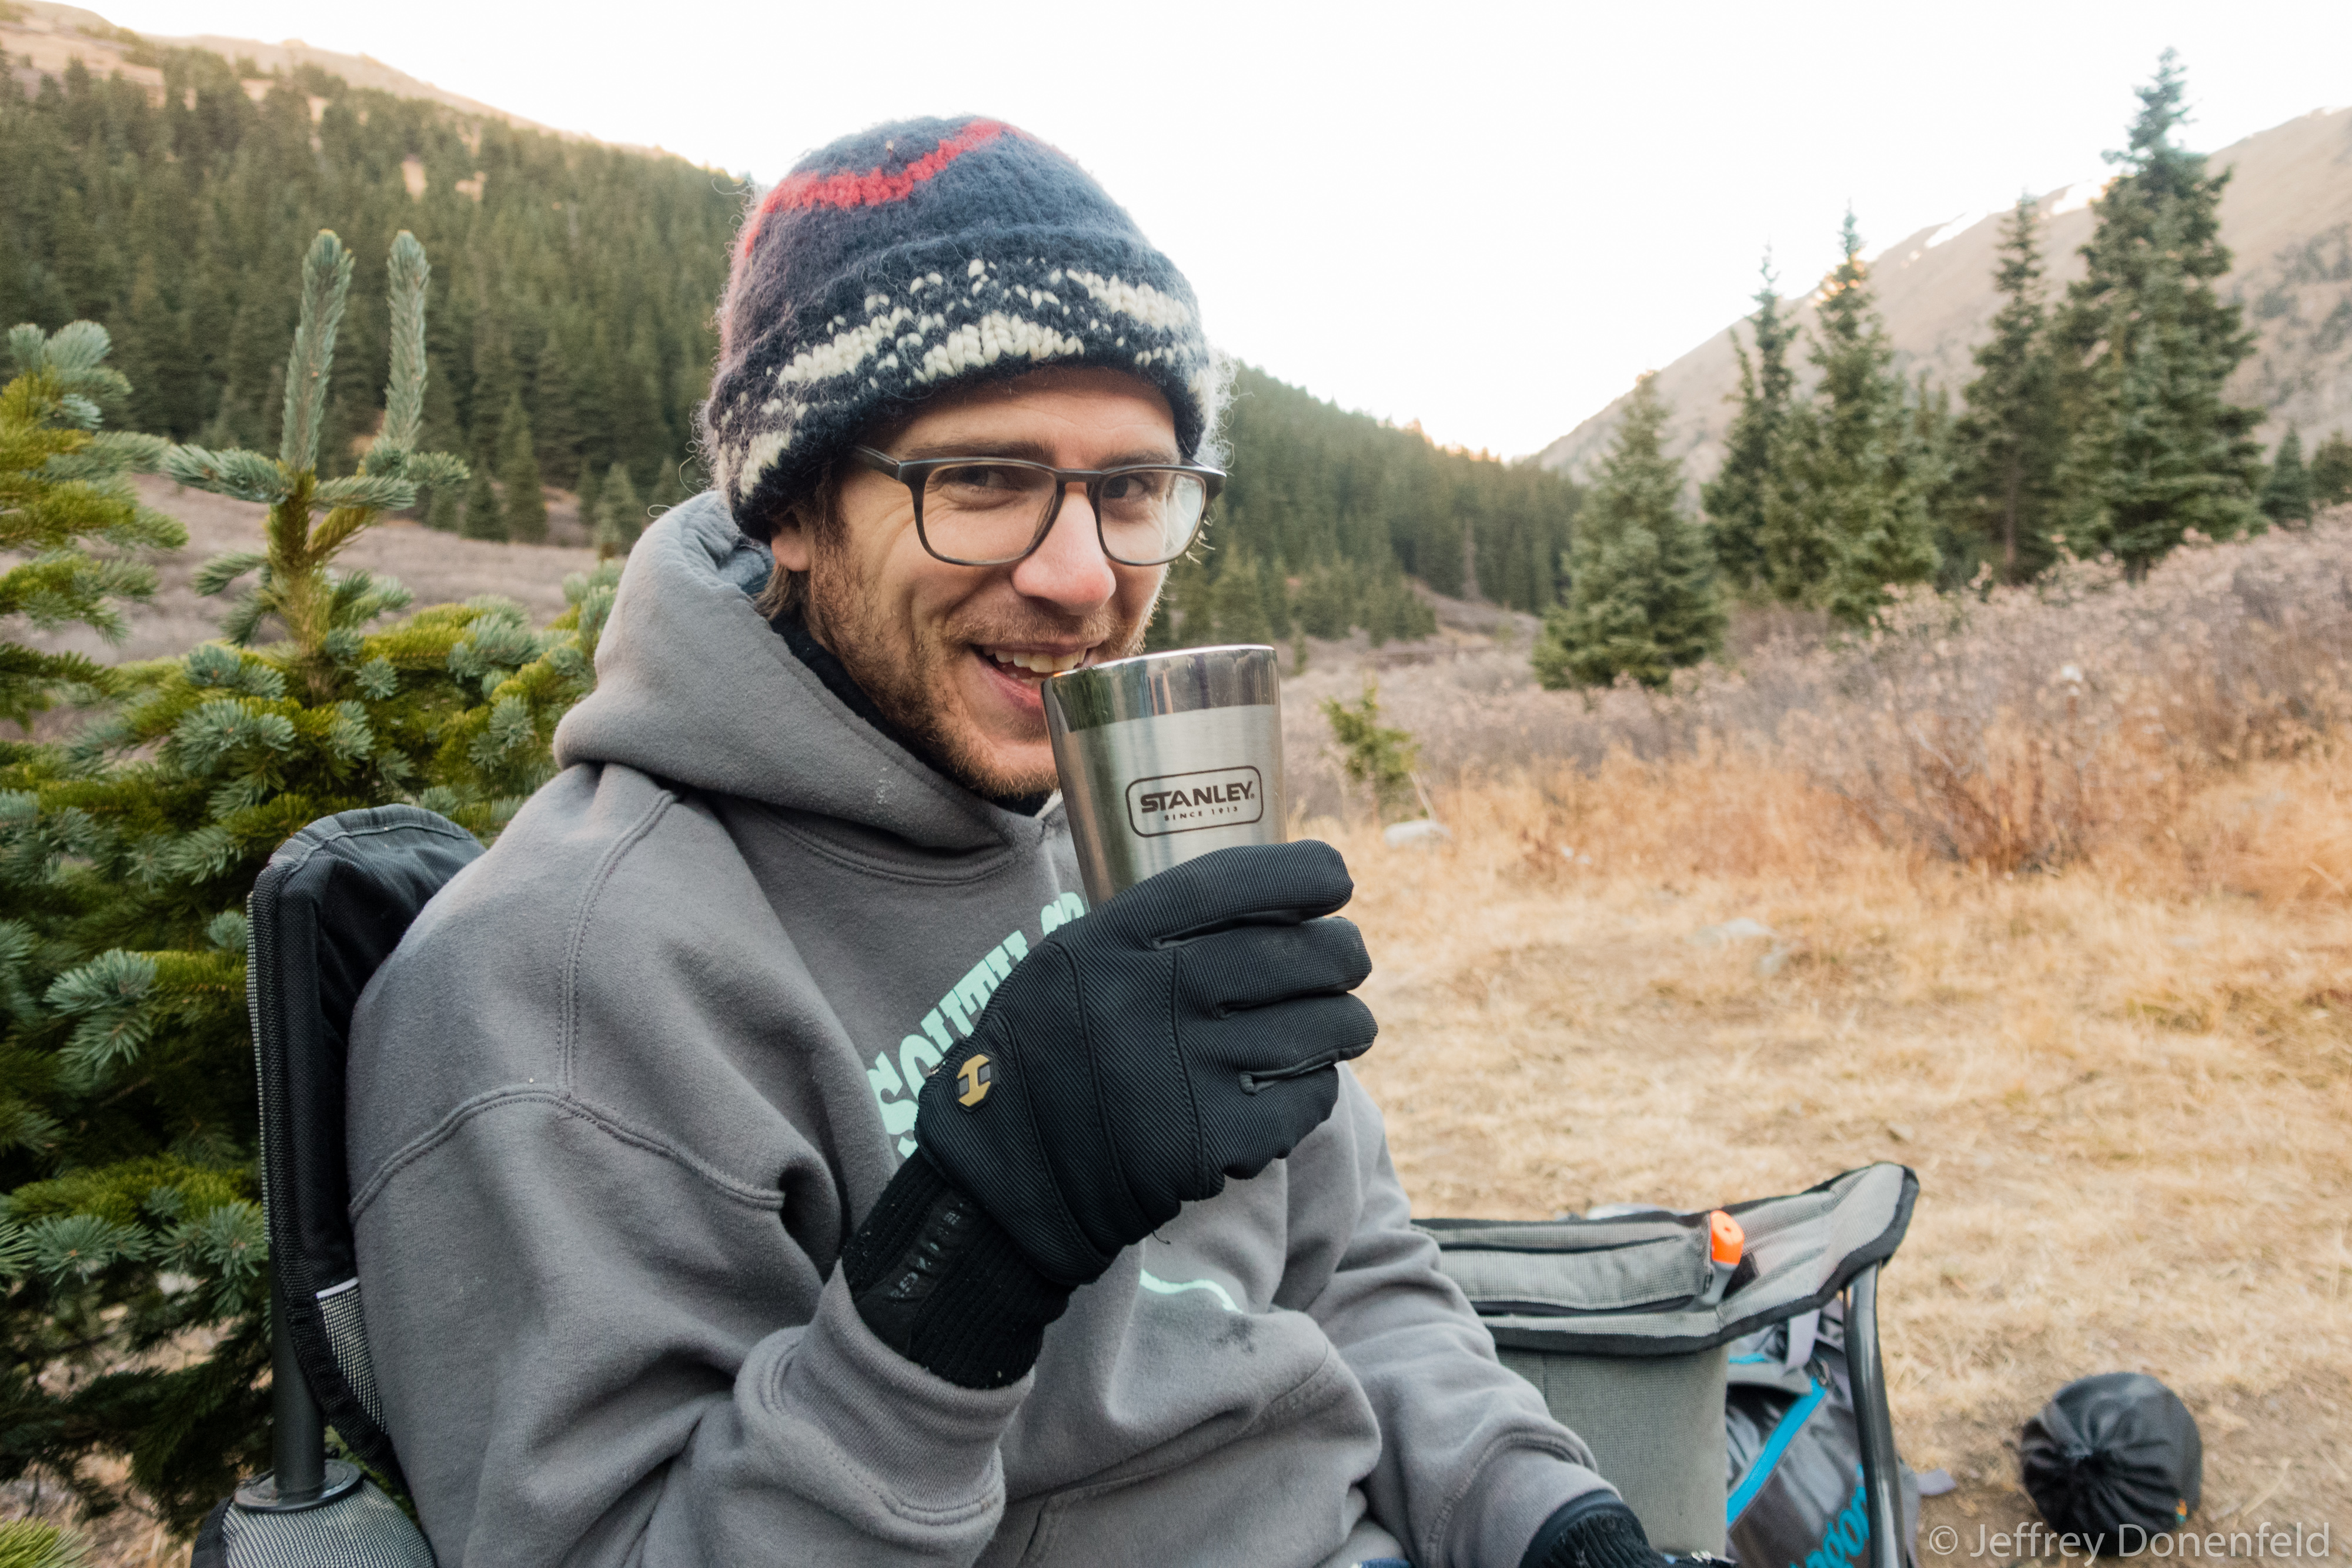 The Best Insulated Pint Glass Buyers Guide – Keep Cold Cold and Hot Hot